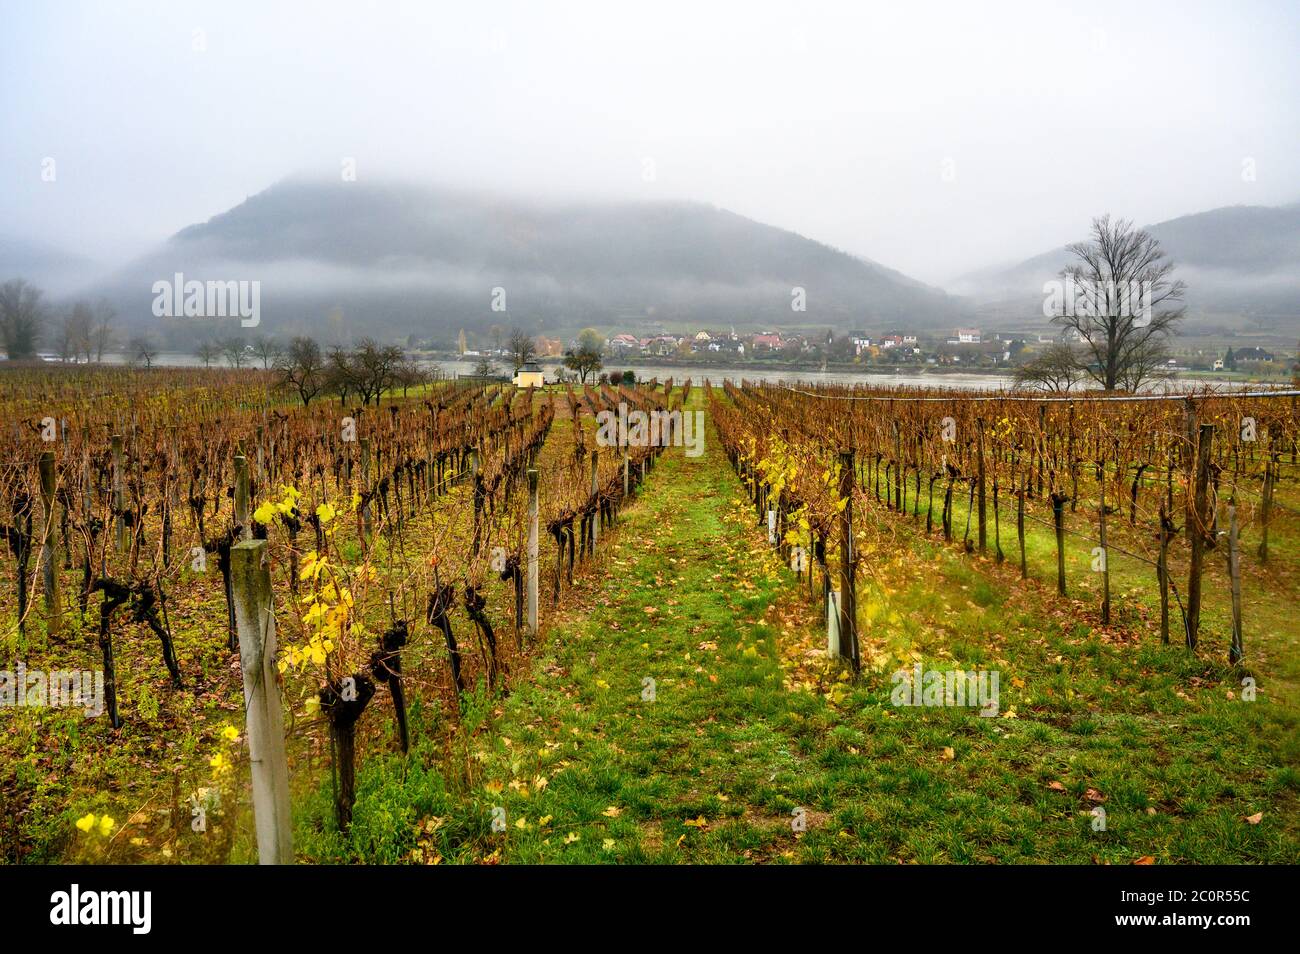 Vineyards in the town of Dürnstein in the Wachau Valley wine region of Austria along the Danube River Stock Photo